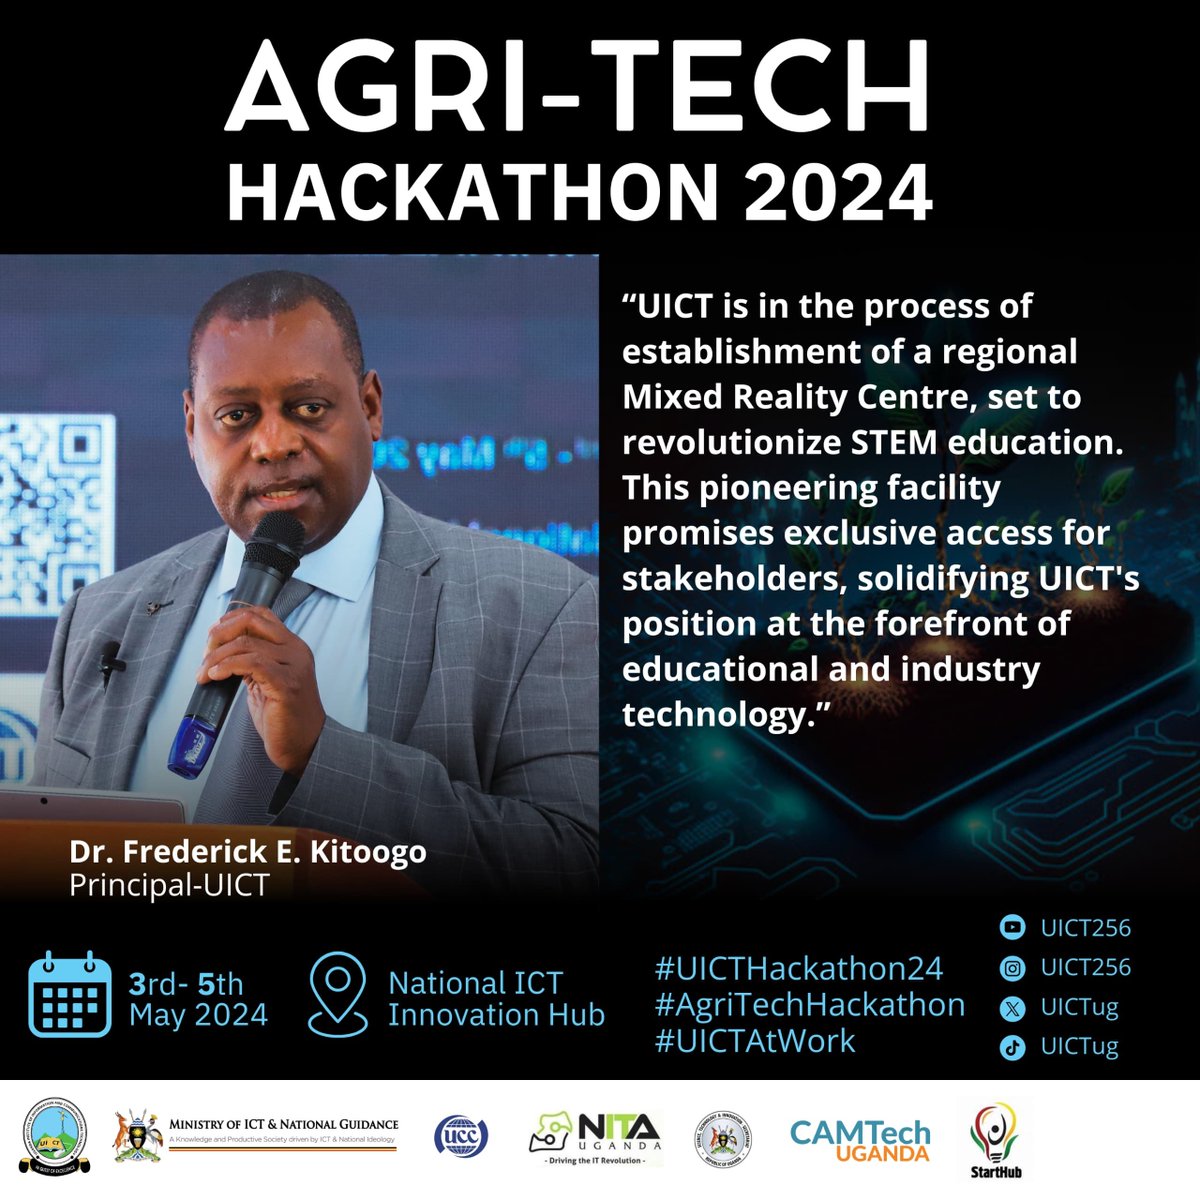 Long & Short Courses & certifications, to support Agri-Tech includes, Machine Learning & Artificial Intelligence for utilization in Agriculture, Healthcare, Education, Finance, Tourism, Oil & Gas. Data Science, Management, & Analytics, & many more. #UICTHackathon24 #UICTAtWork